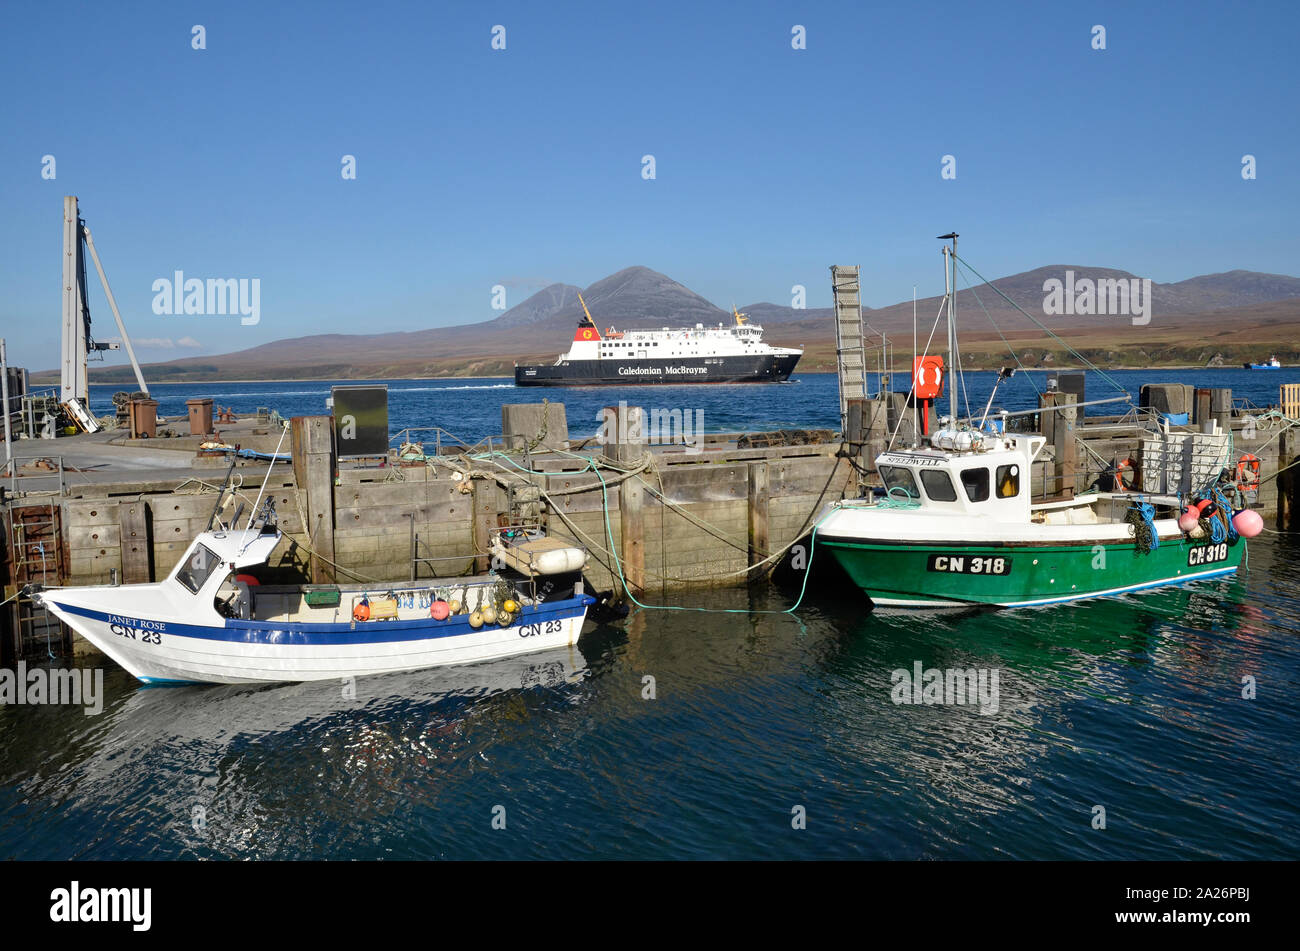 MV Finlaggan, a Caledonian MacBrayne island ferry at Port Askaig on the Scottish Island of Islay. The Paps of Jura can be seen in the background. Stock Photo